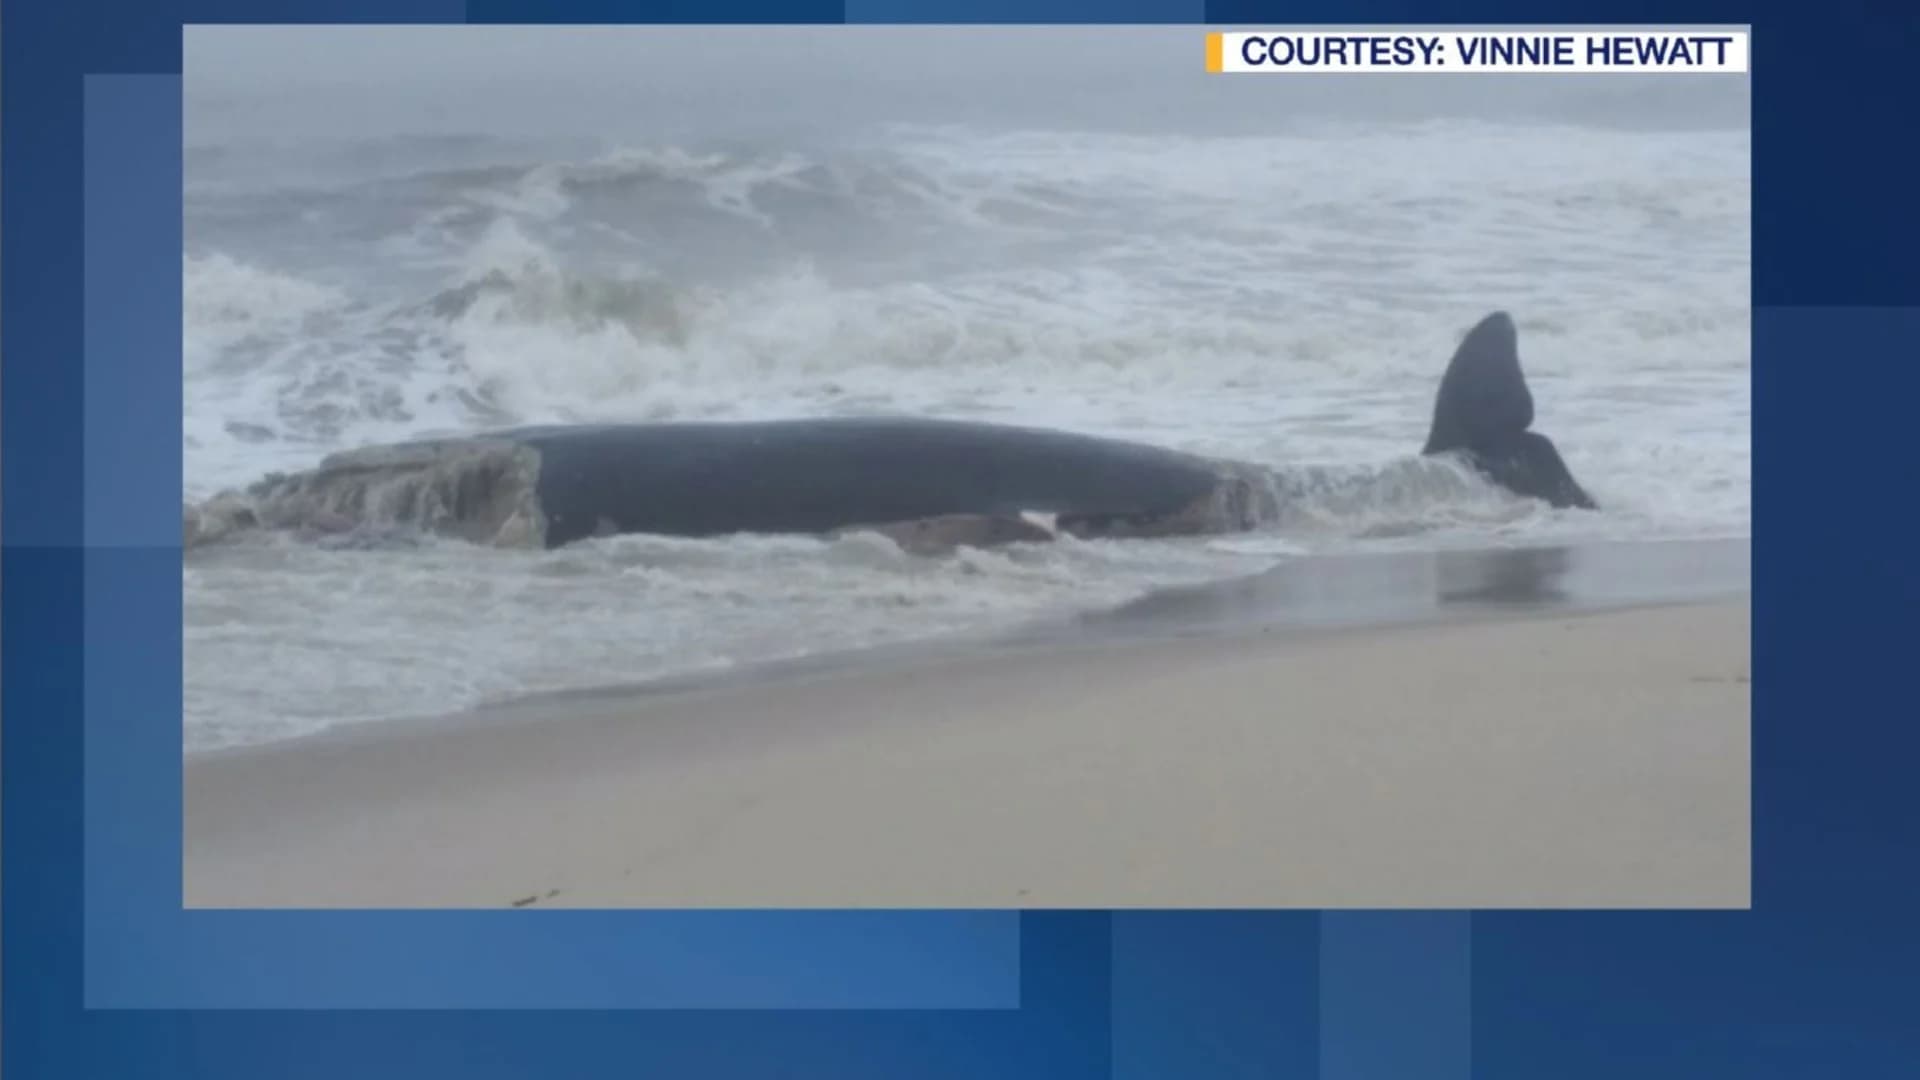 Dead whales along the coastline prompt federal investigation